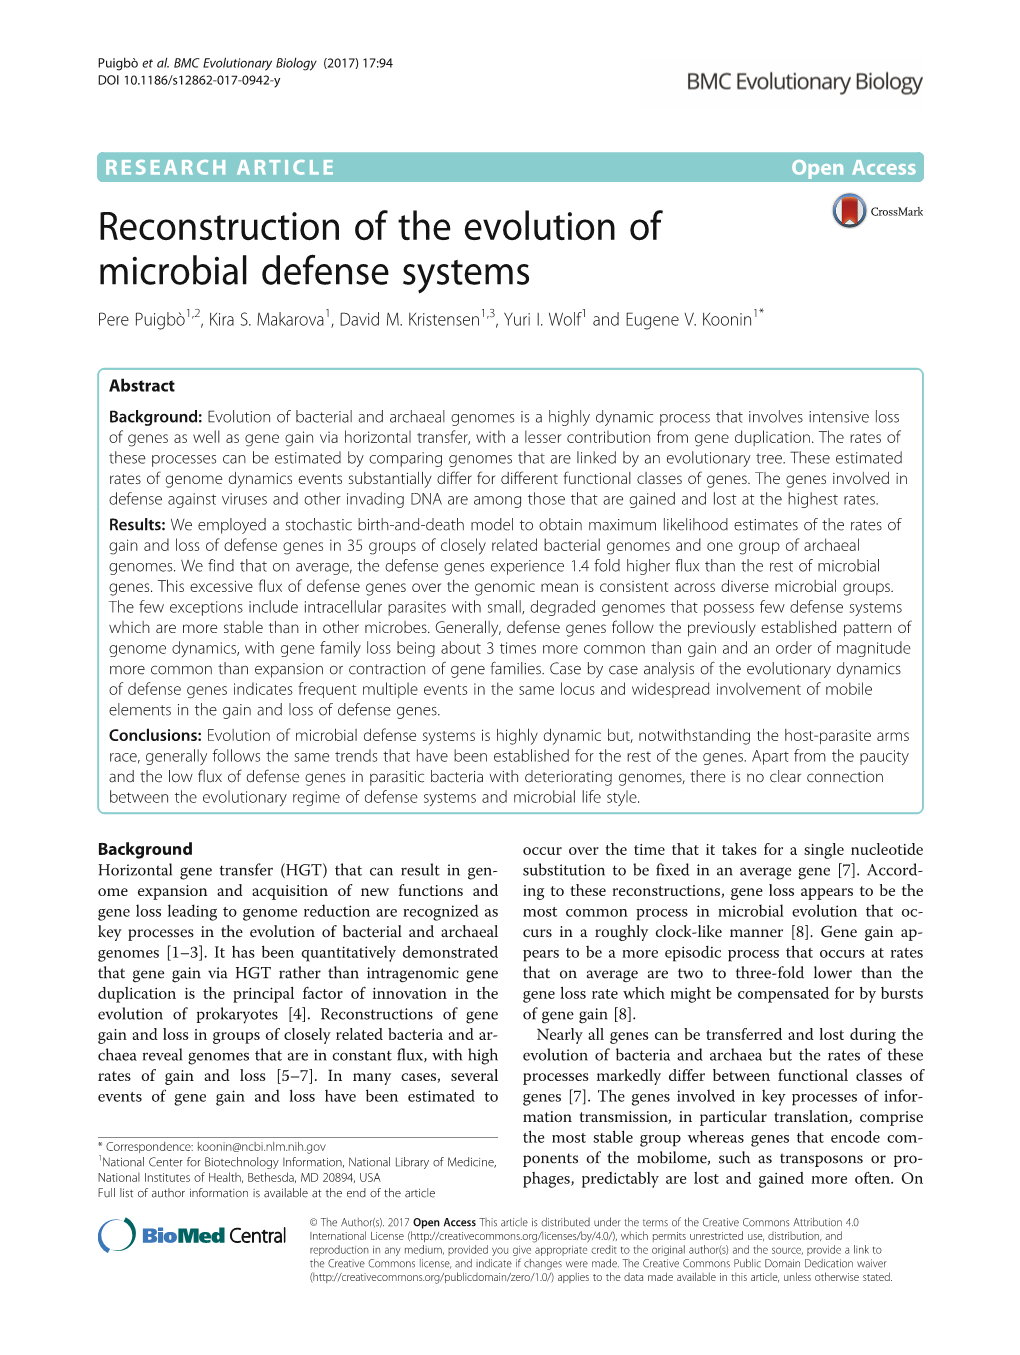 Reconstruction of the Evolution of Microbial Defense Systems Pere Puigbò1,2, Kira S